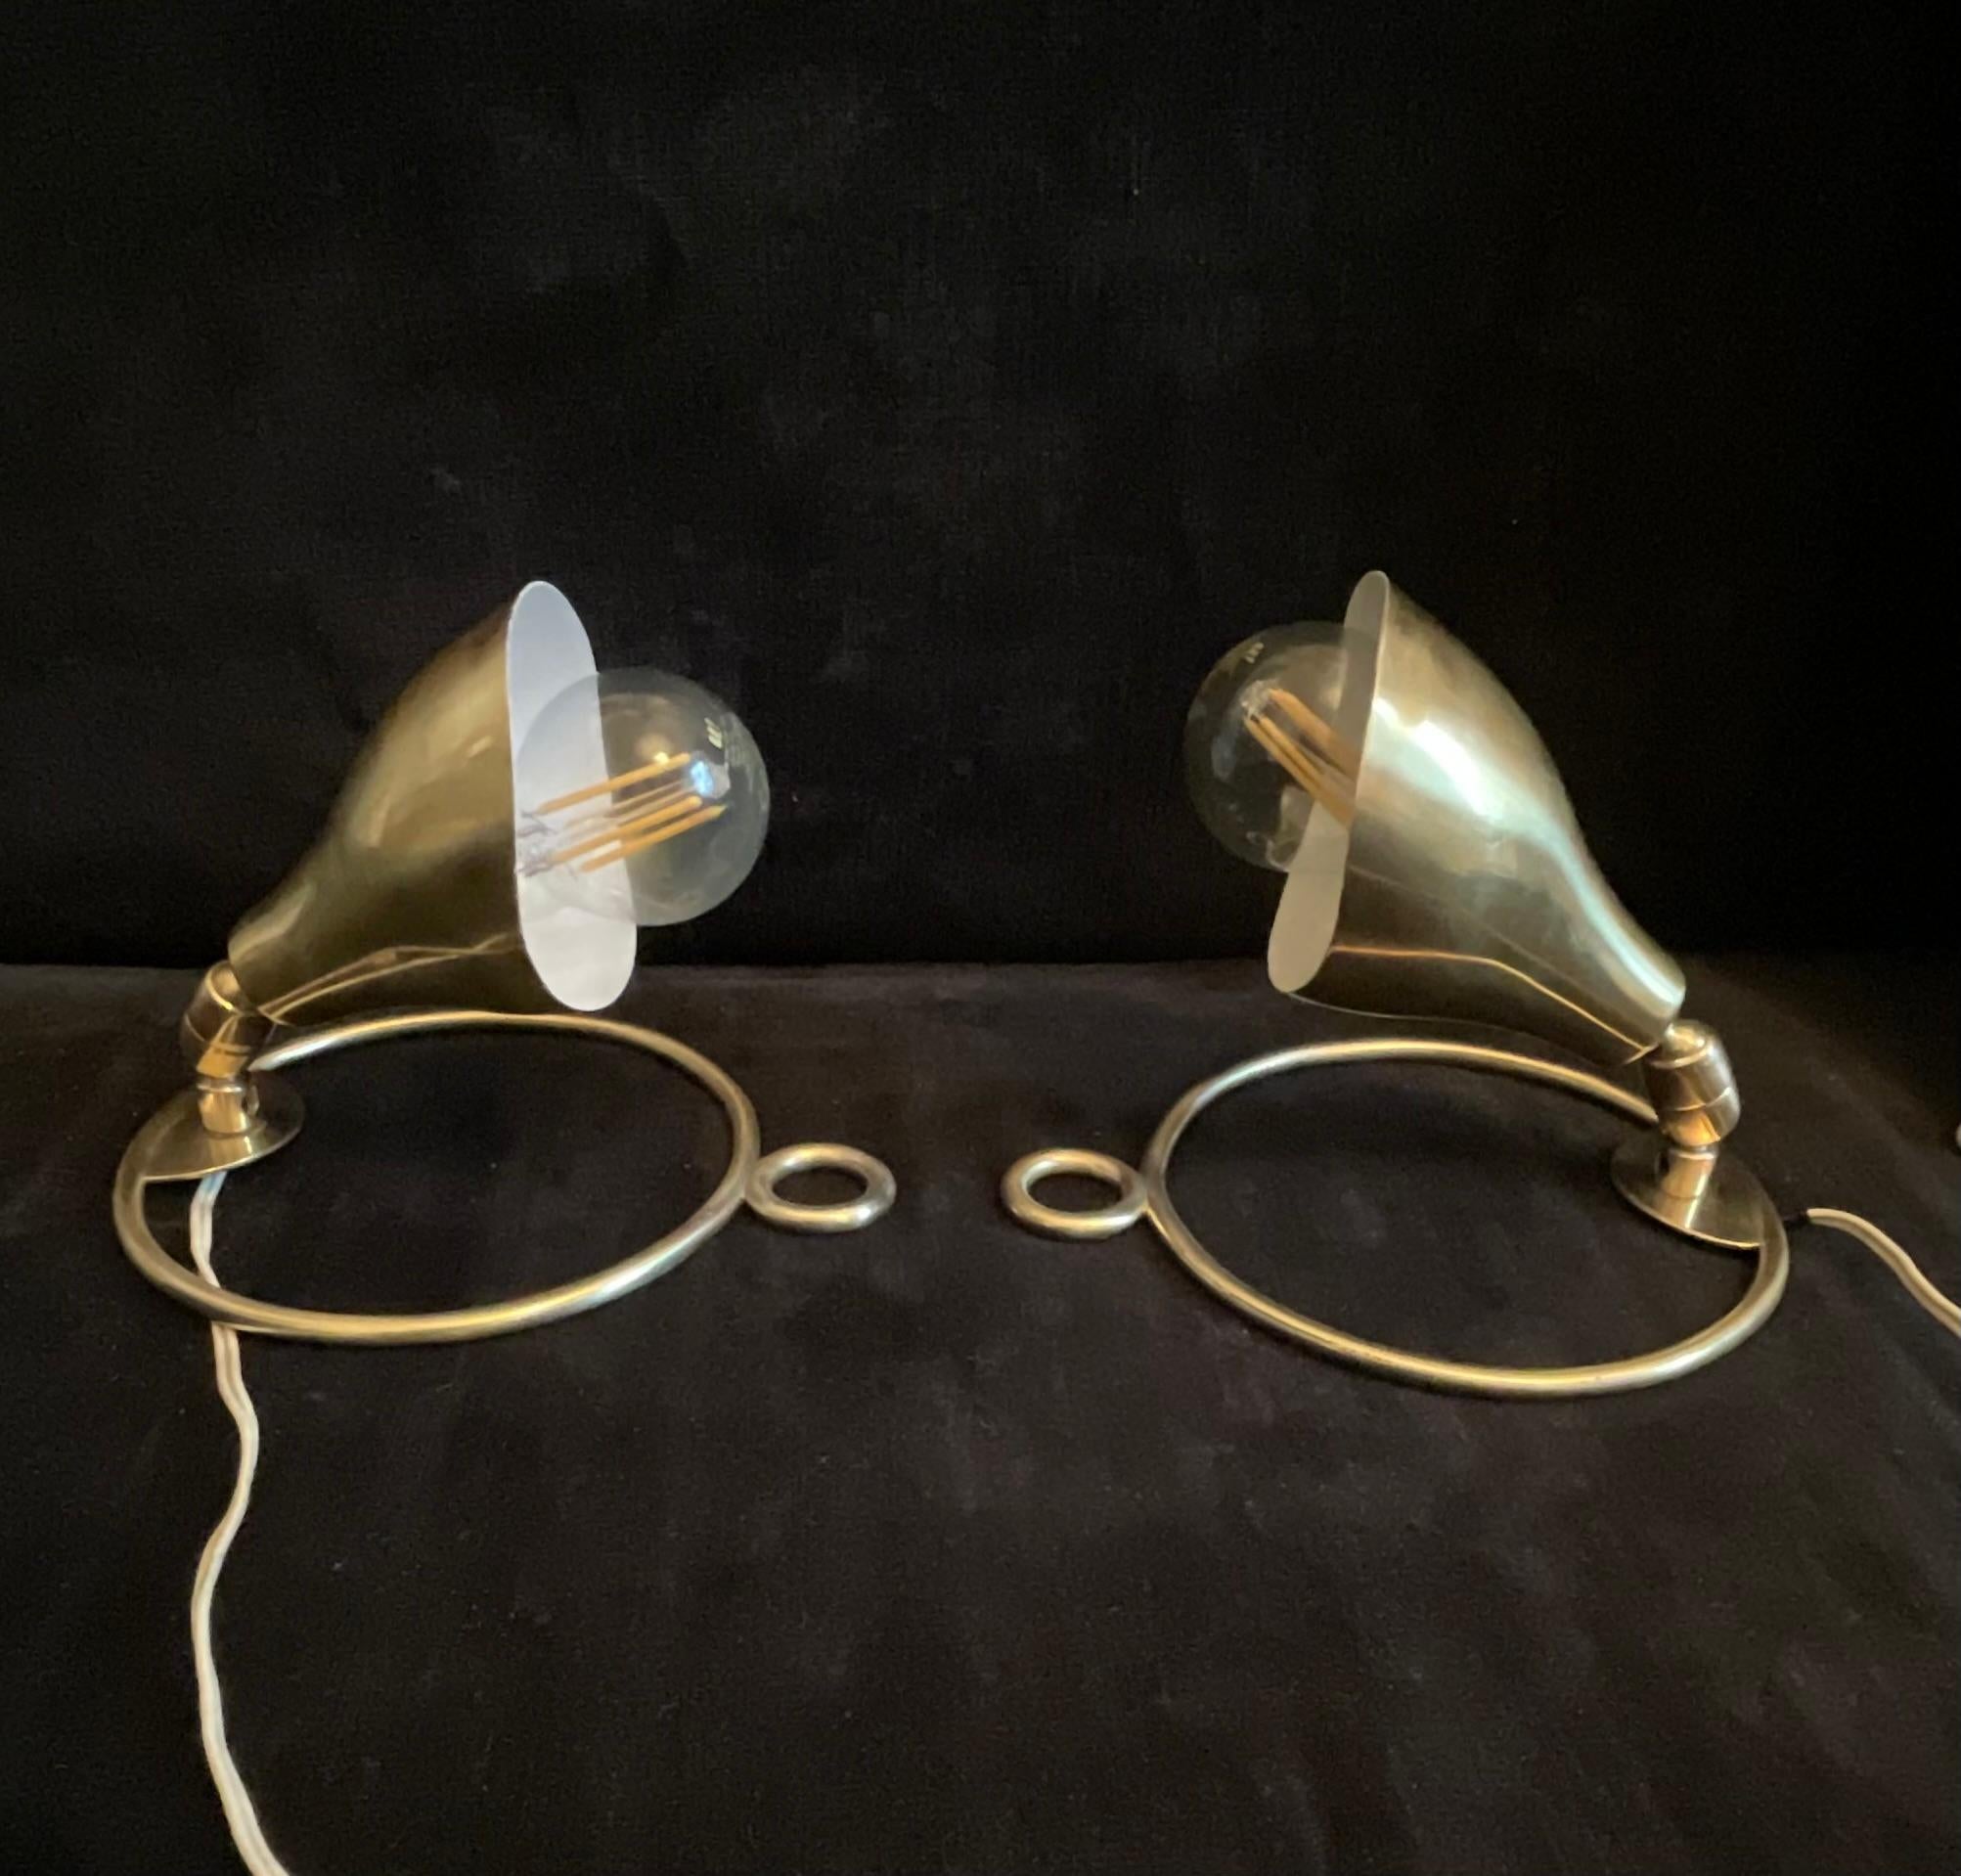 SARFATTI Gino - ARTELUCE -Pair of brass wall or floor sconces  For Sale 2